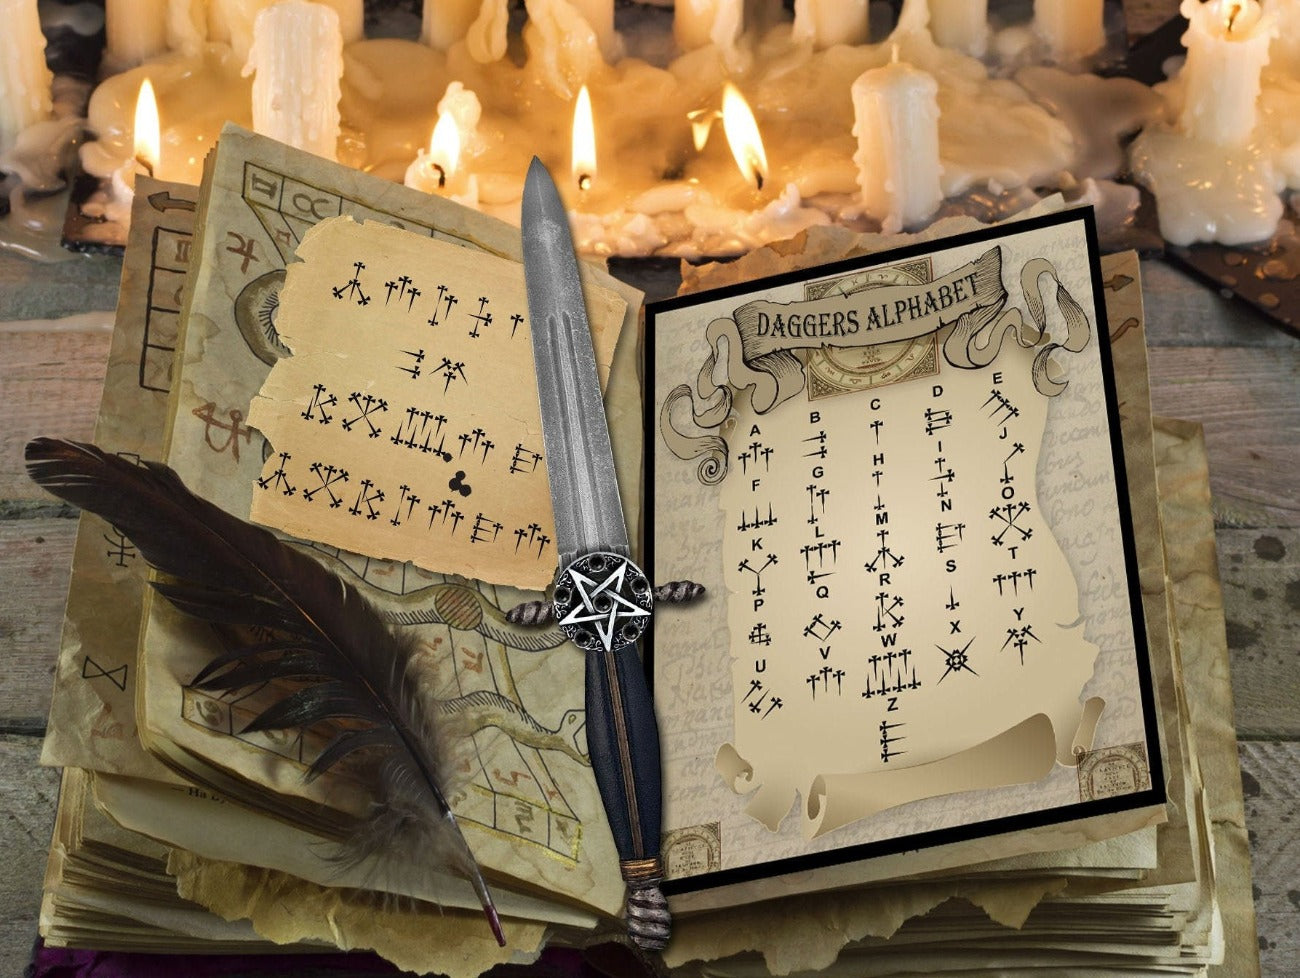 DAGGERS ALPHABET, Witchcraft Magical Secret Script, For Writing Spells and Rituals, Printable Spellbook Page - Morgana Magick Spell